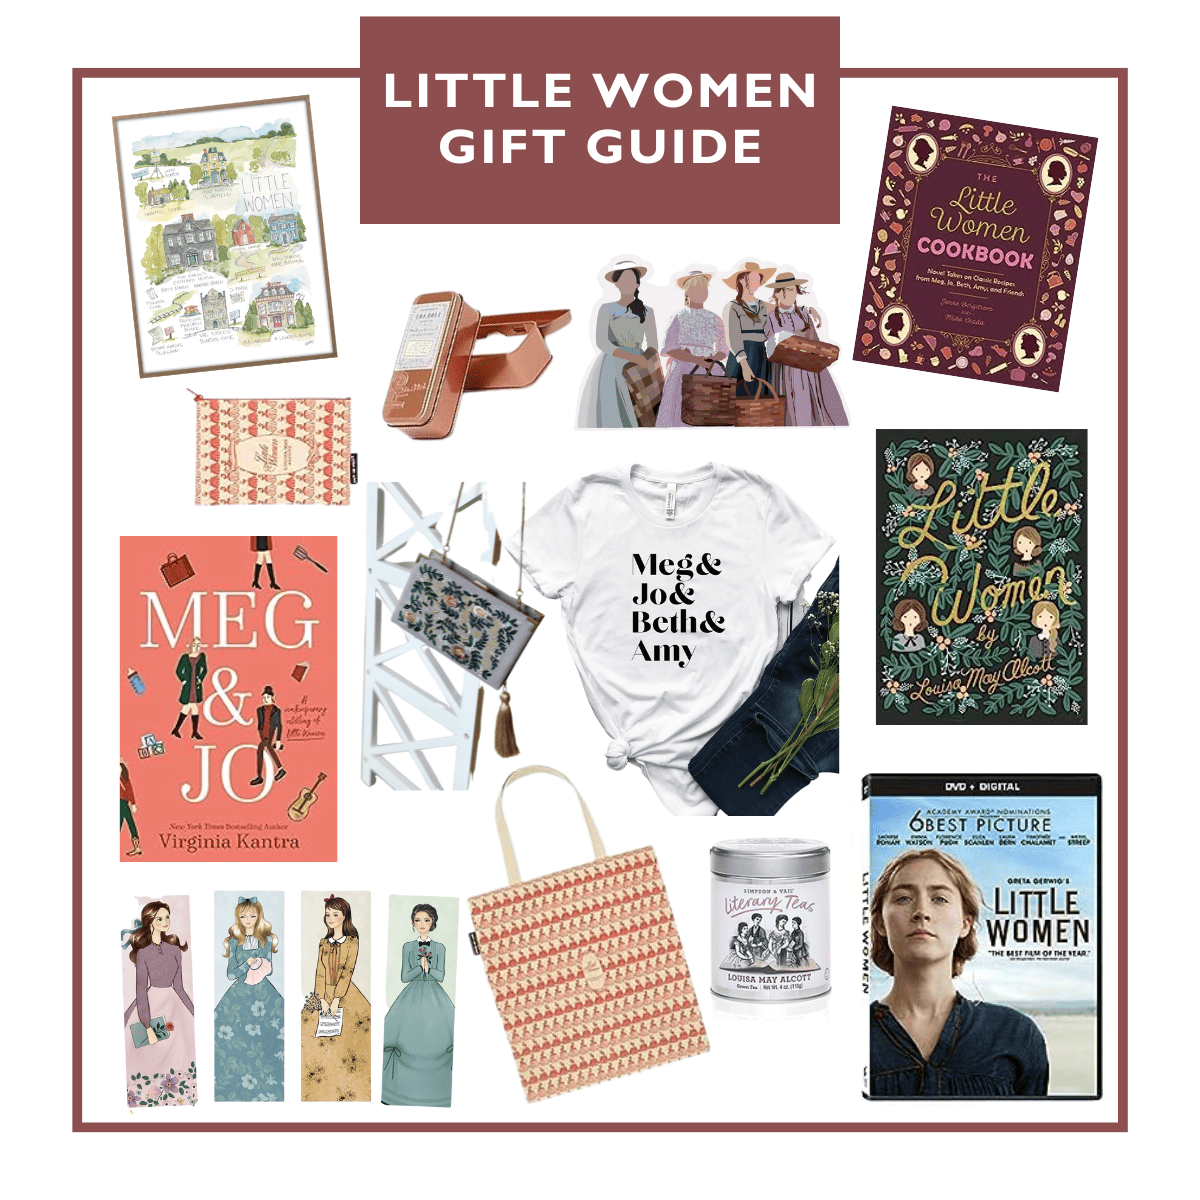 gift guide collage of Little Women Gift Guide